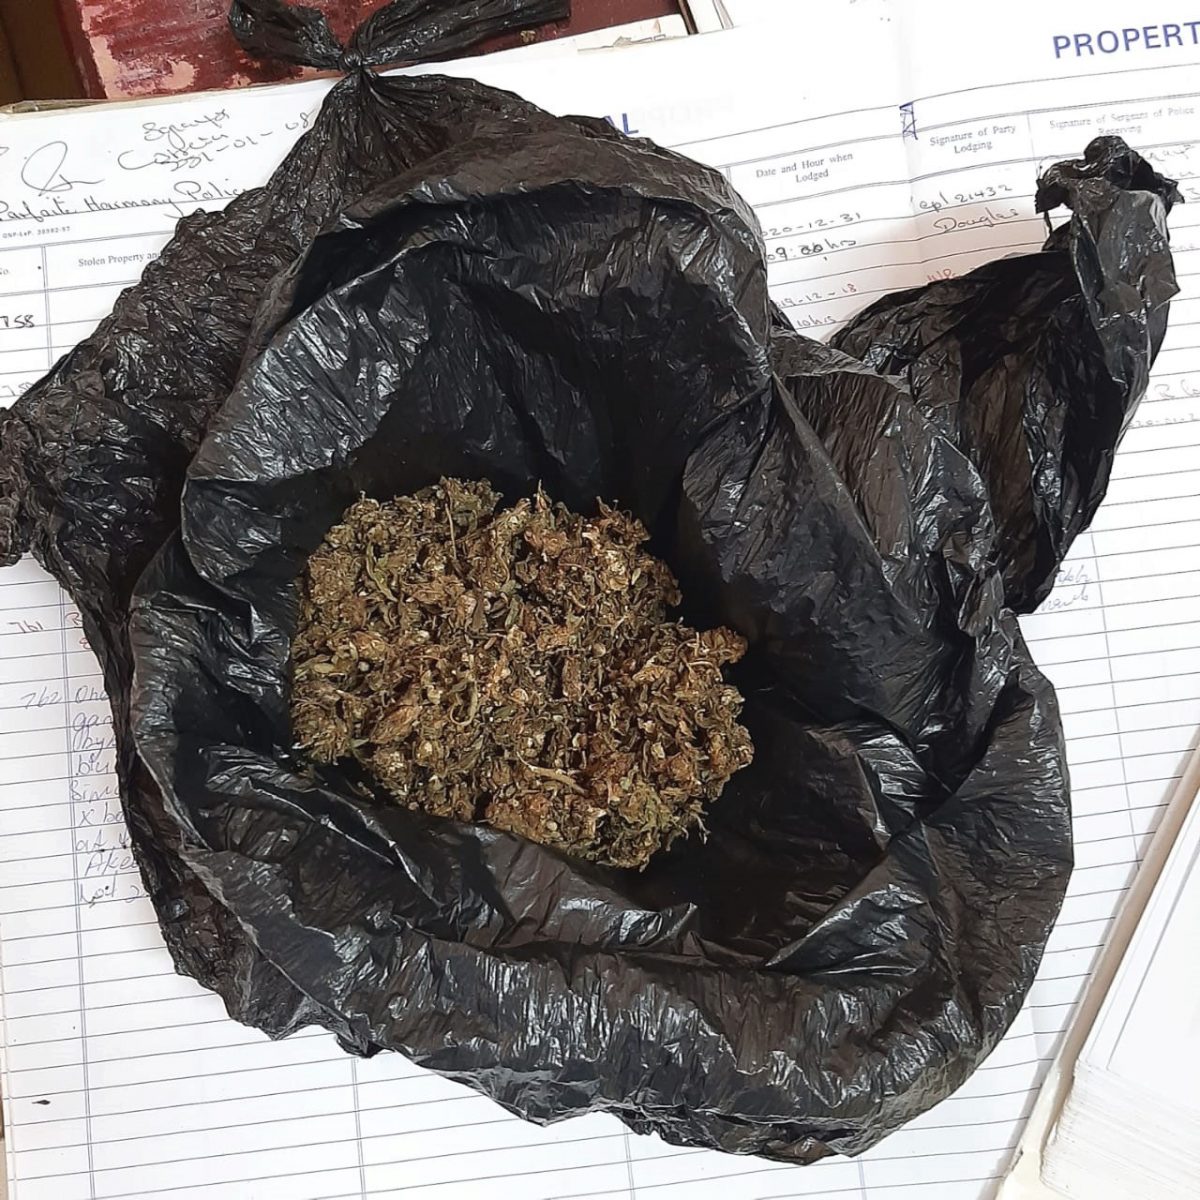 The cannabis that was found. 